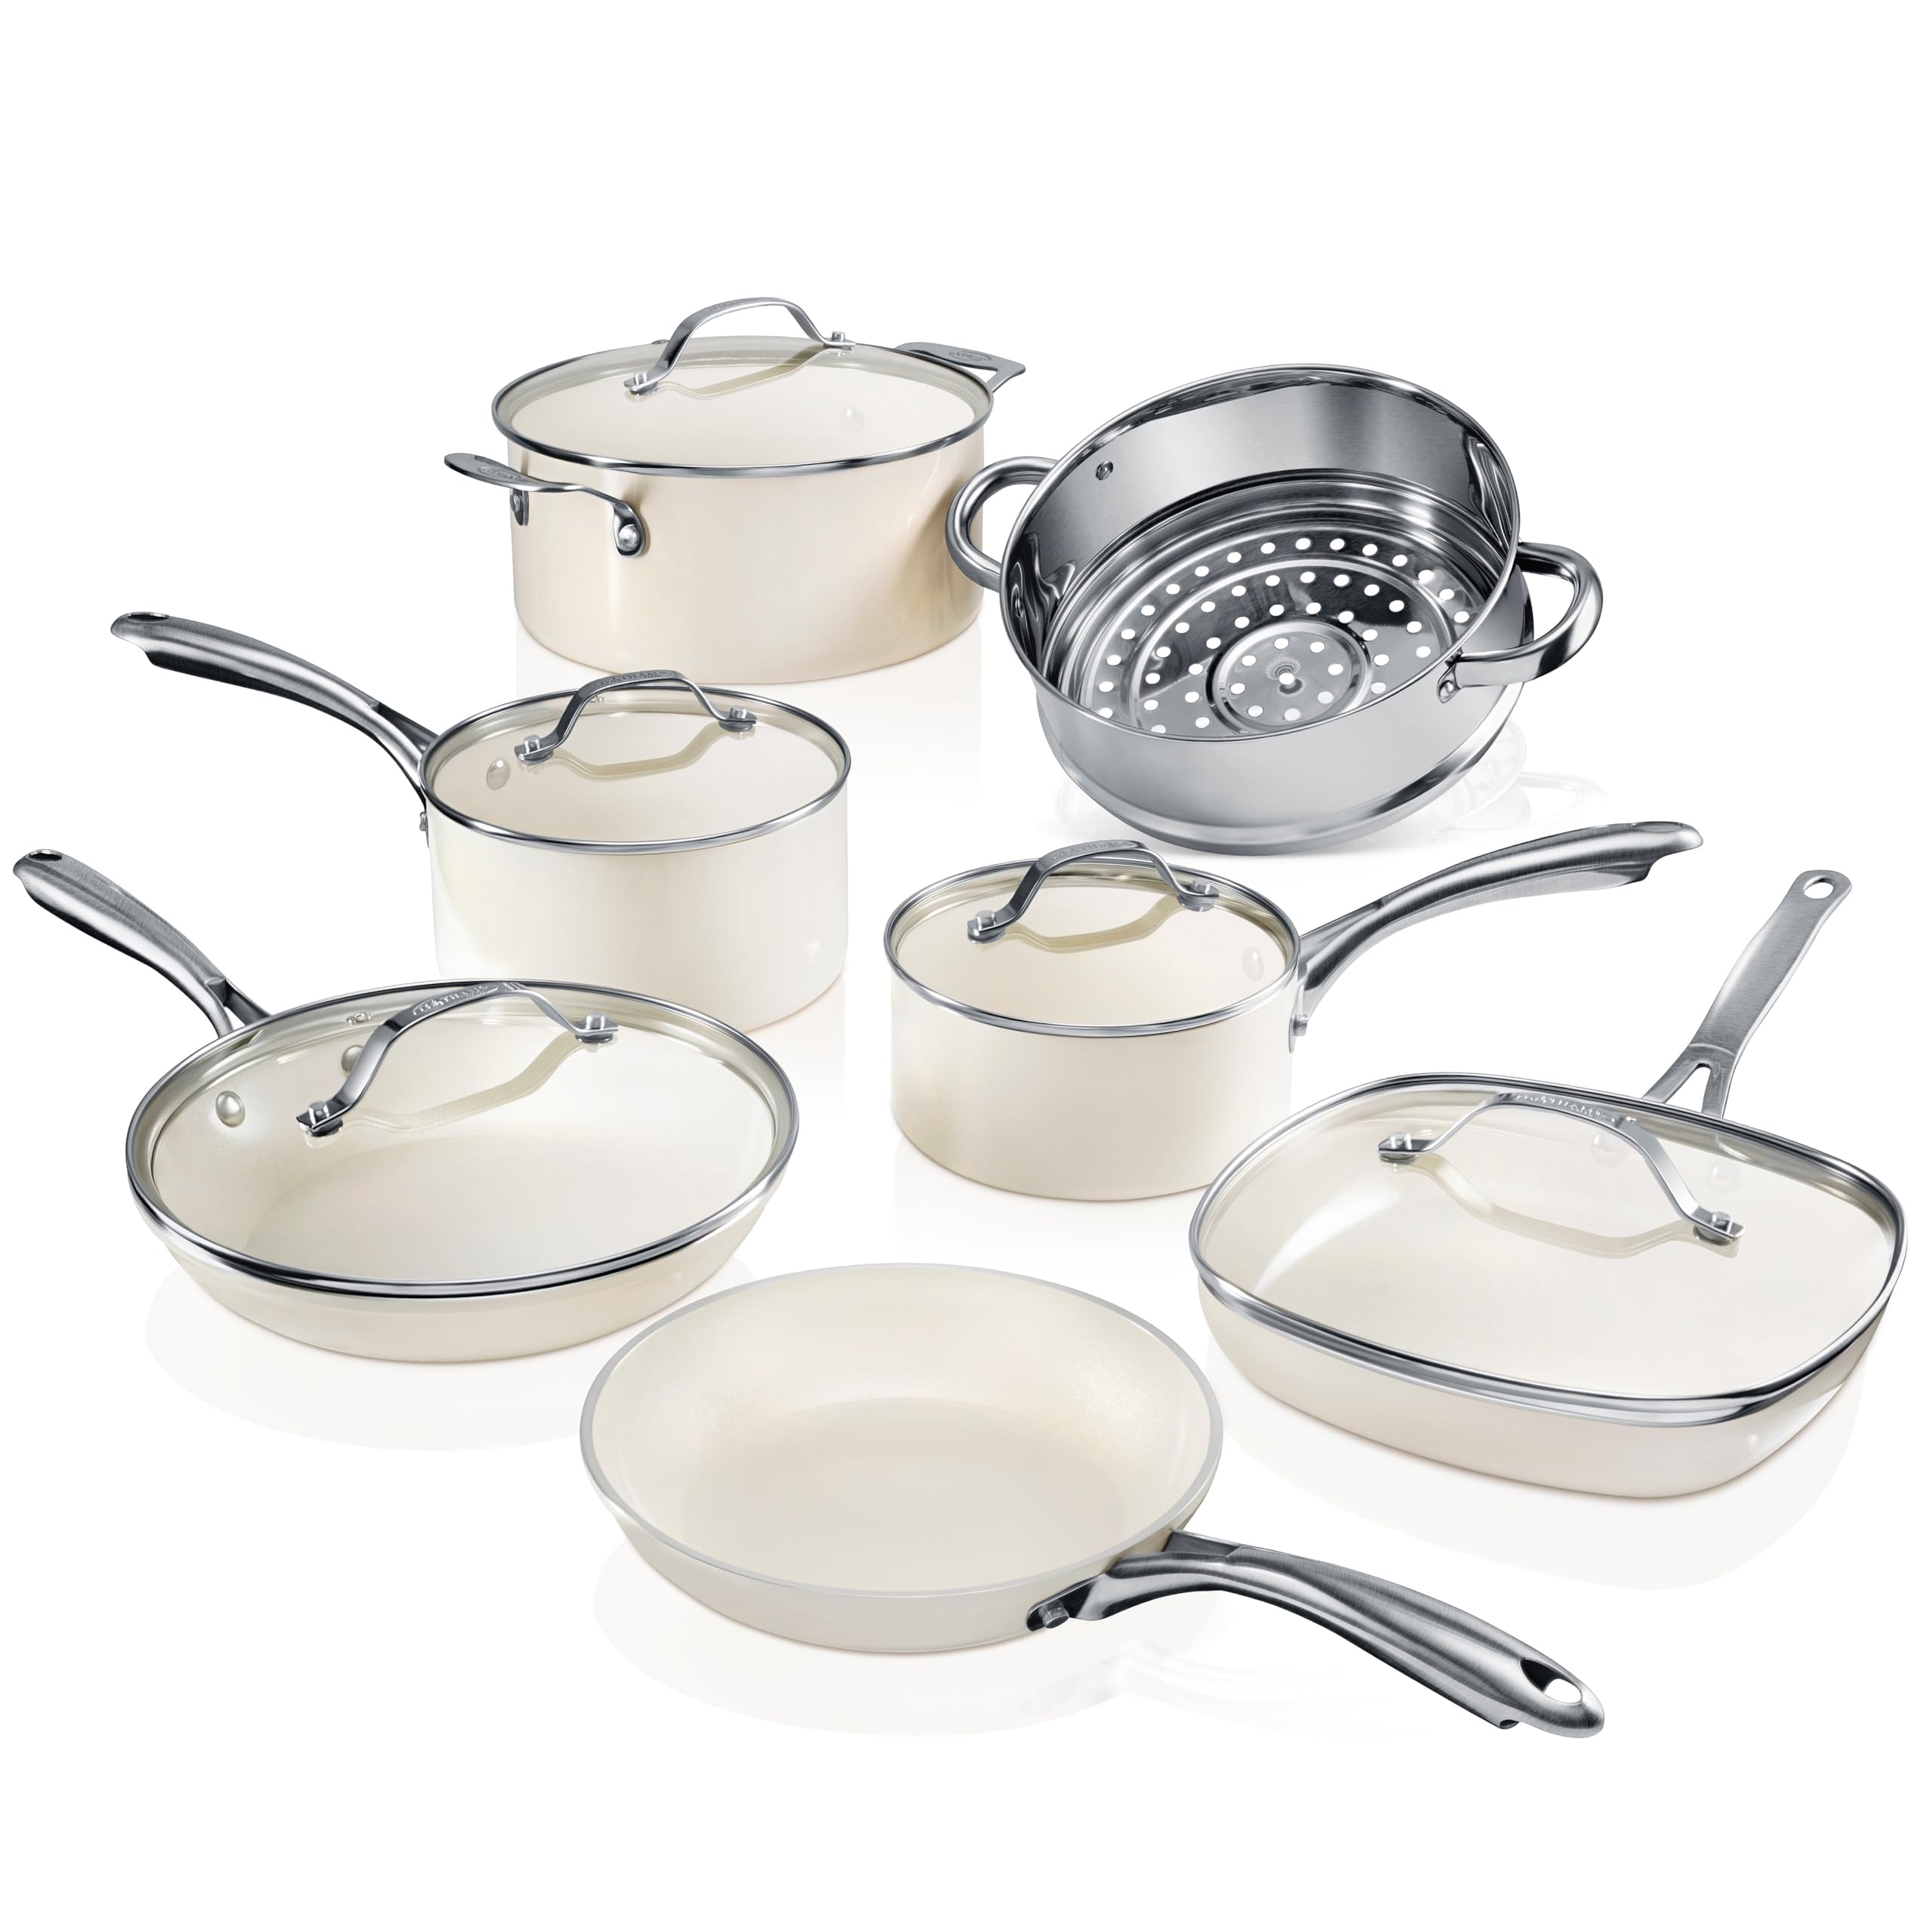 Gotham Steel 12 Pc Pots and Pans Set Non Stick Cookware Set, Pot and Pan Set, Kitchen Cookware Sets, Ceramic Cookware Set, Nonstick Cookware Set, Lightweight and Durable, Dishwasher Safe, Cream White